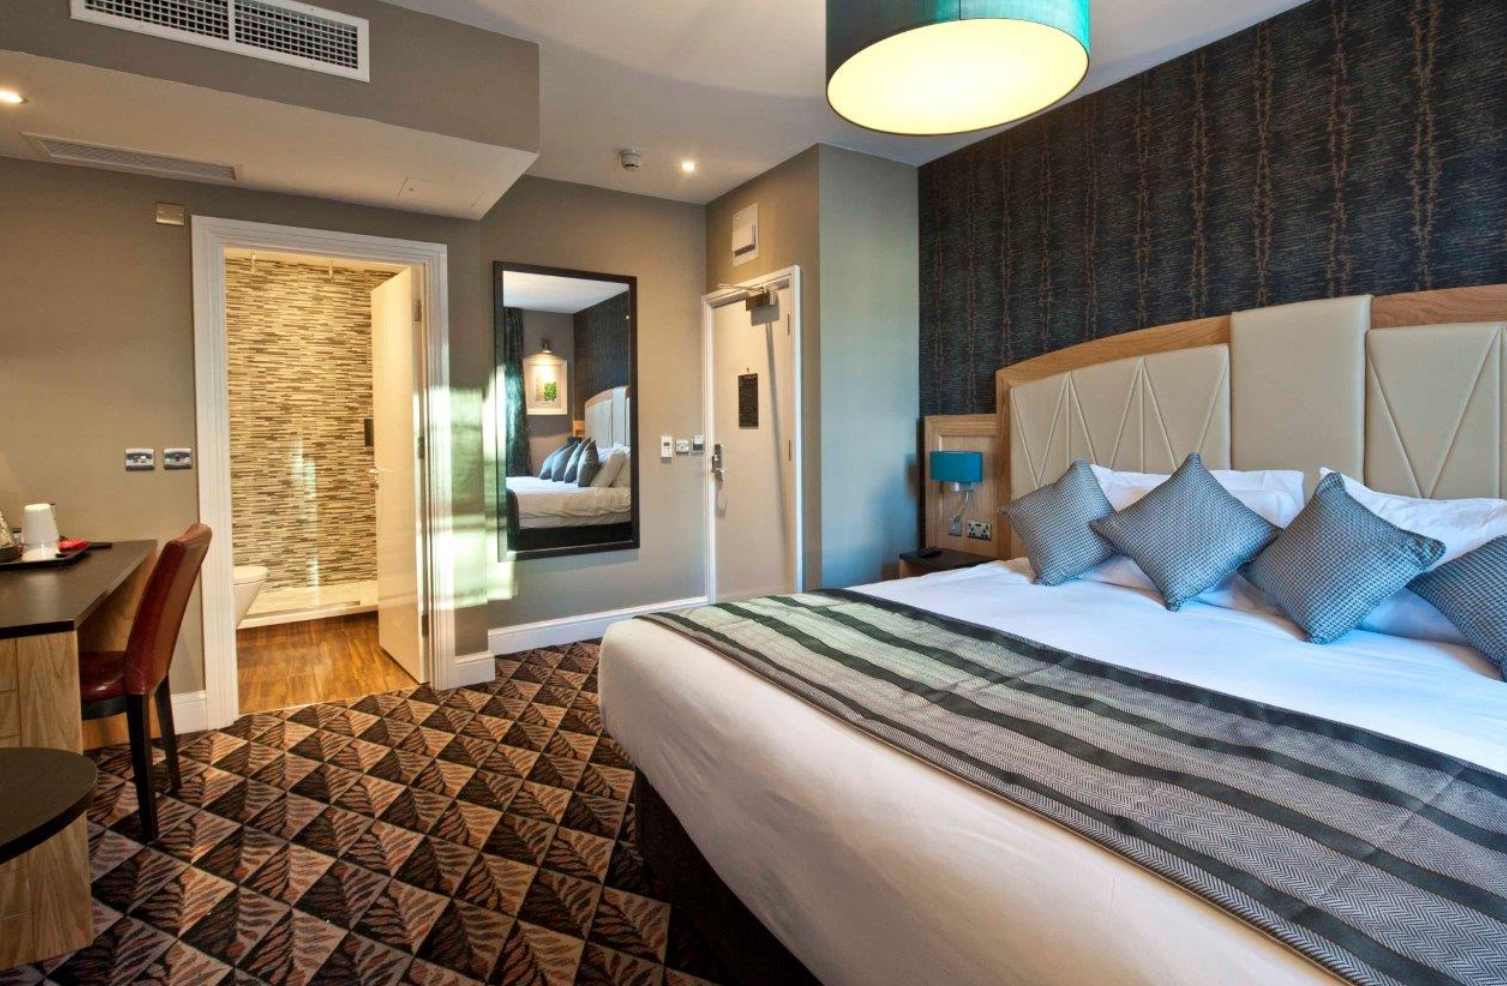 Sleep soundly in our comfortable rooms